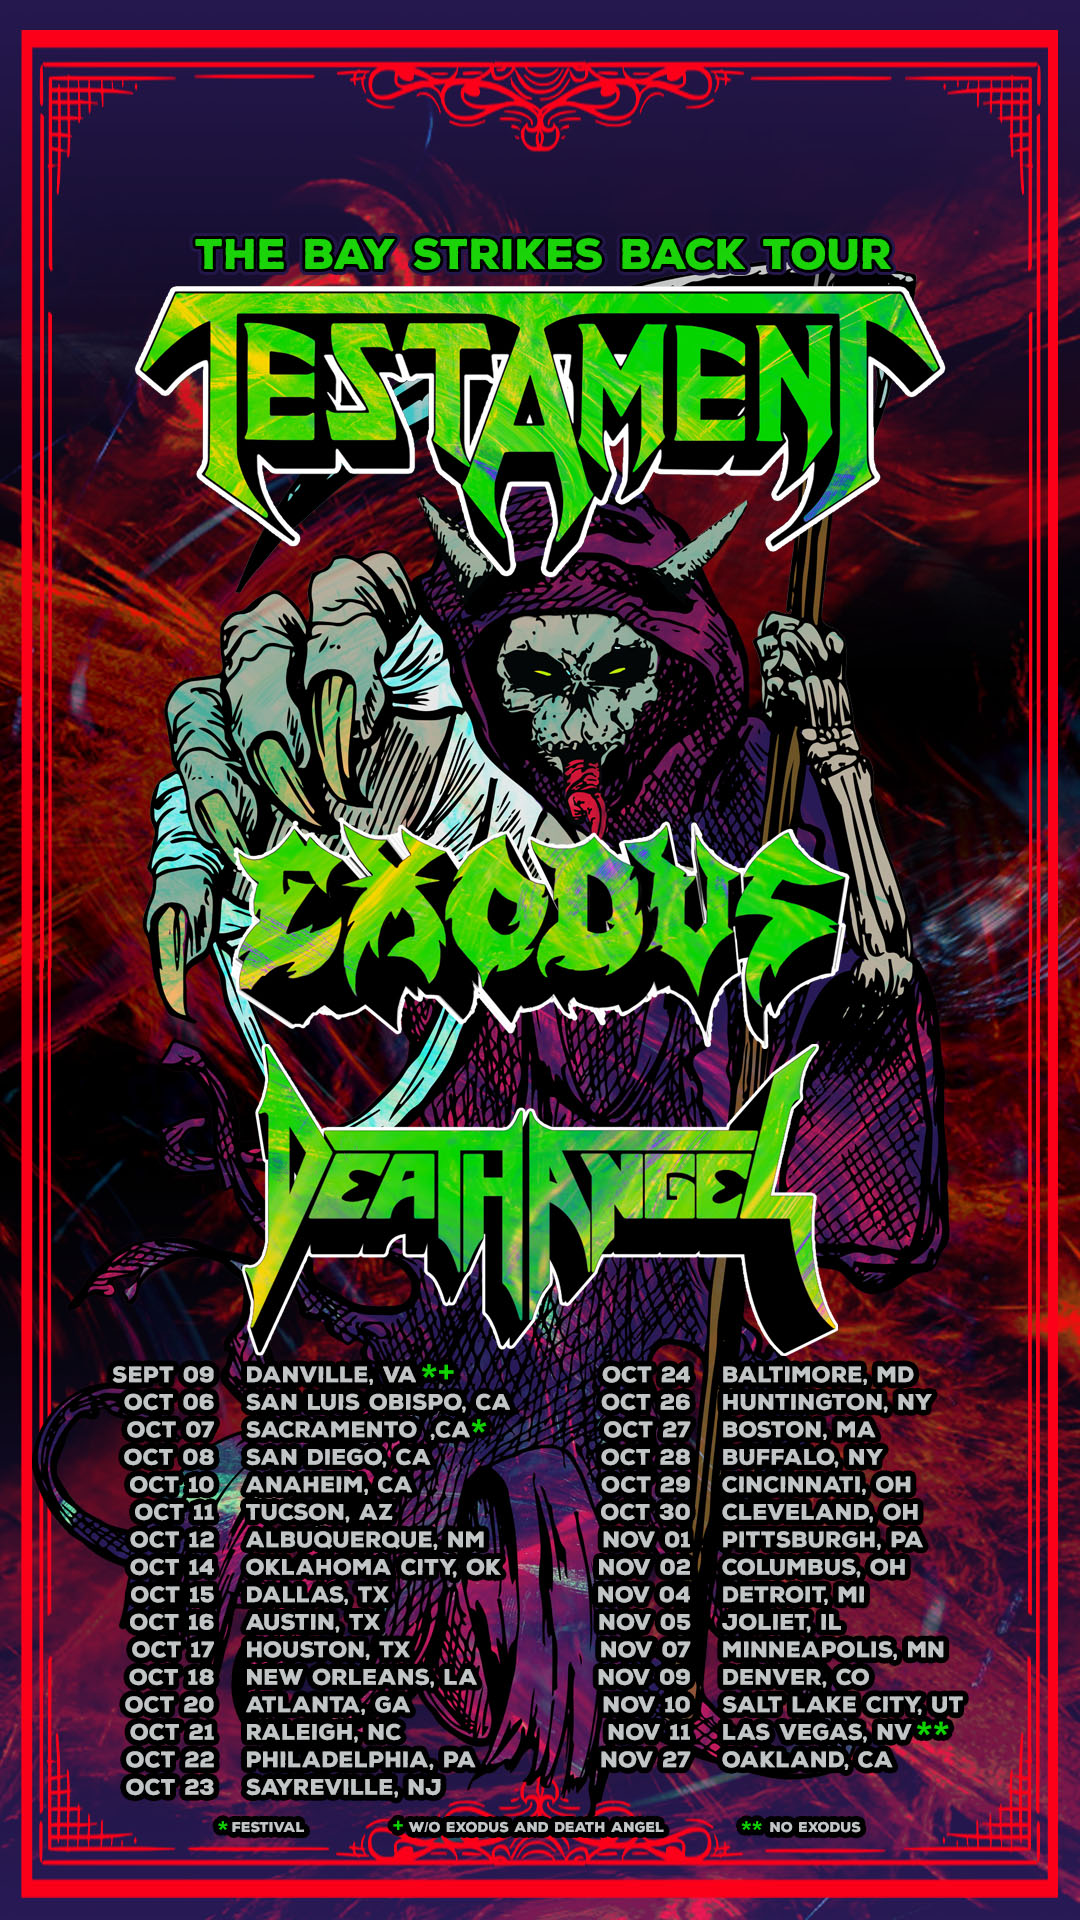 NUCLEAR BLAST Announces "The Bay Strikes Back Tour" With TESTAMENT, EXODUS, AND DEATH ANGEL!